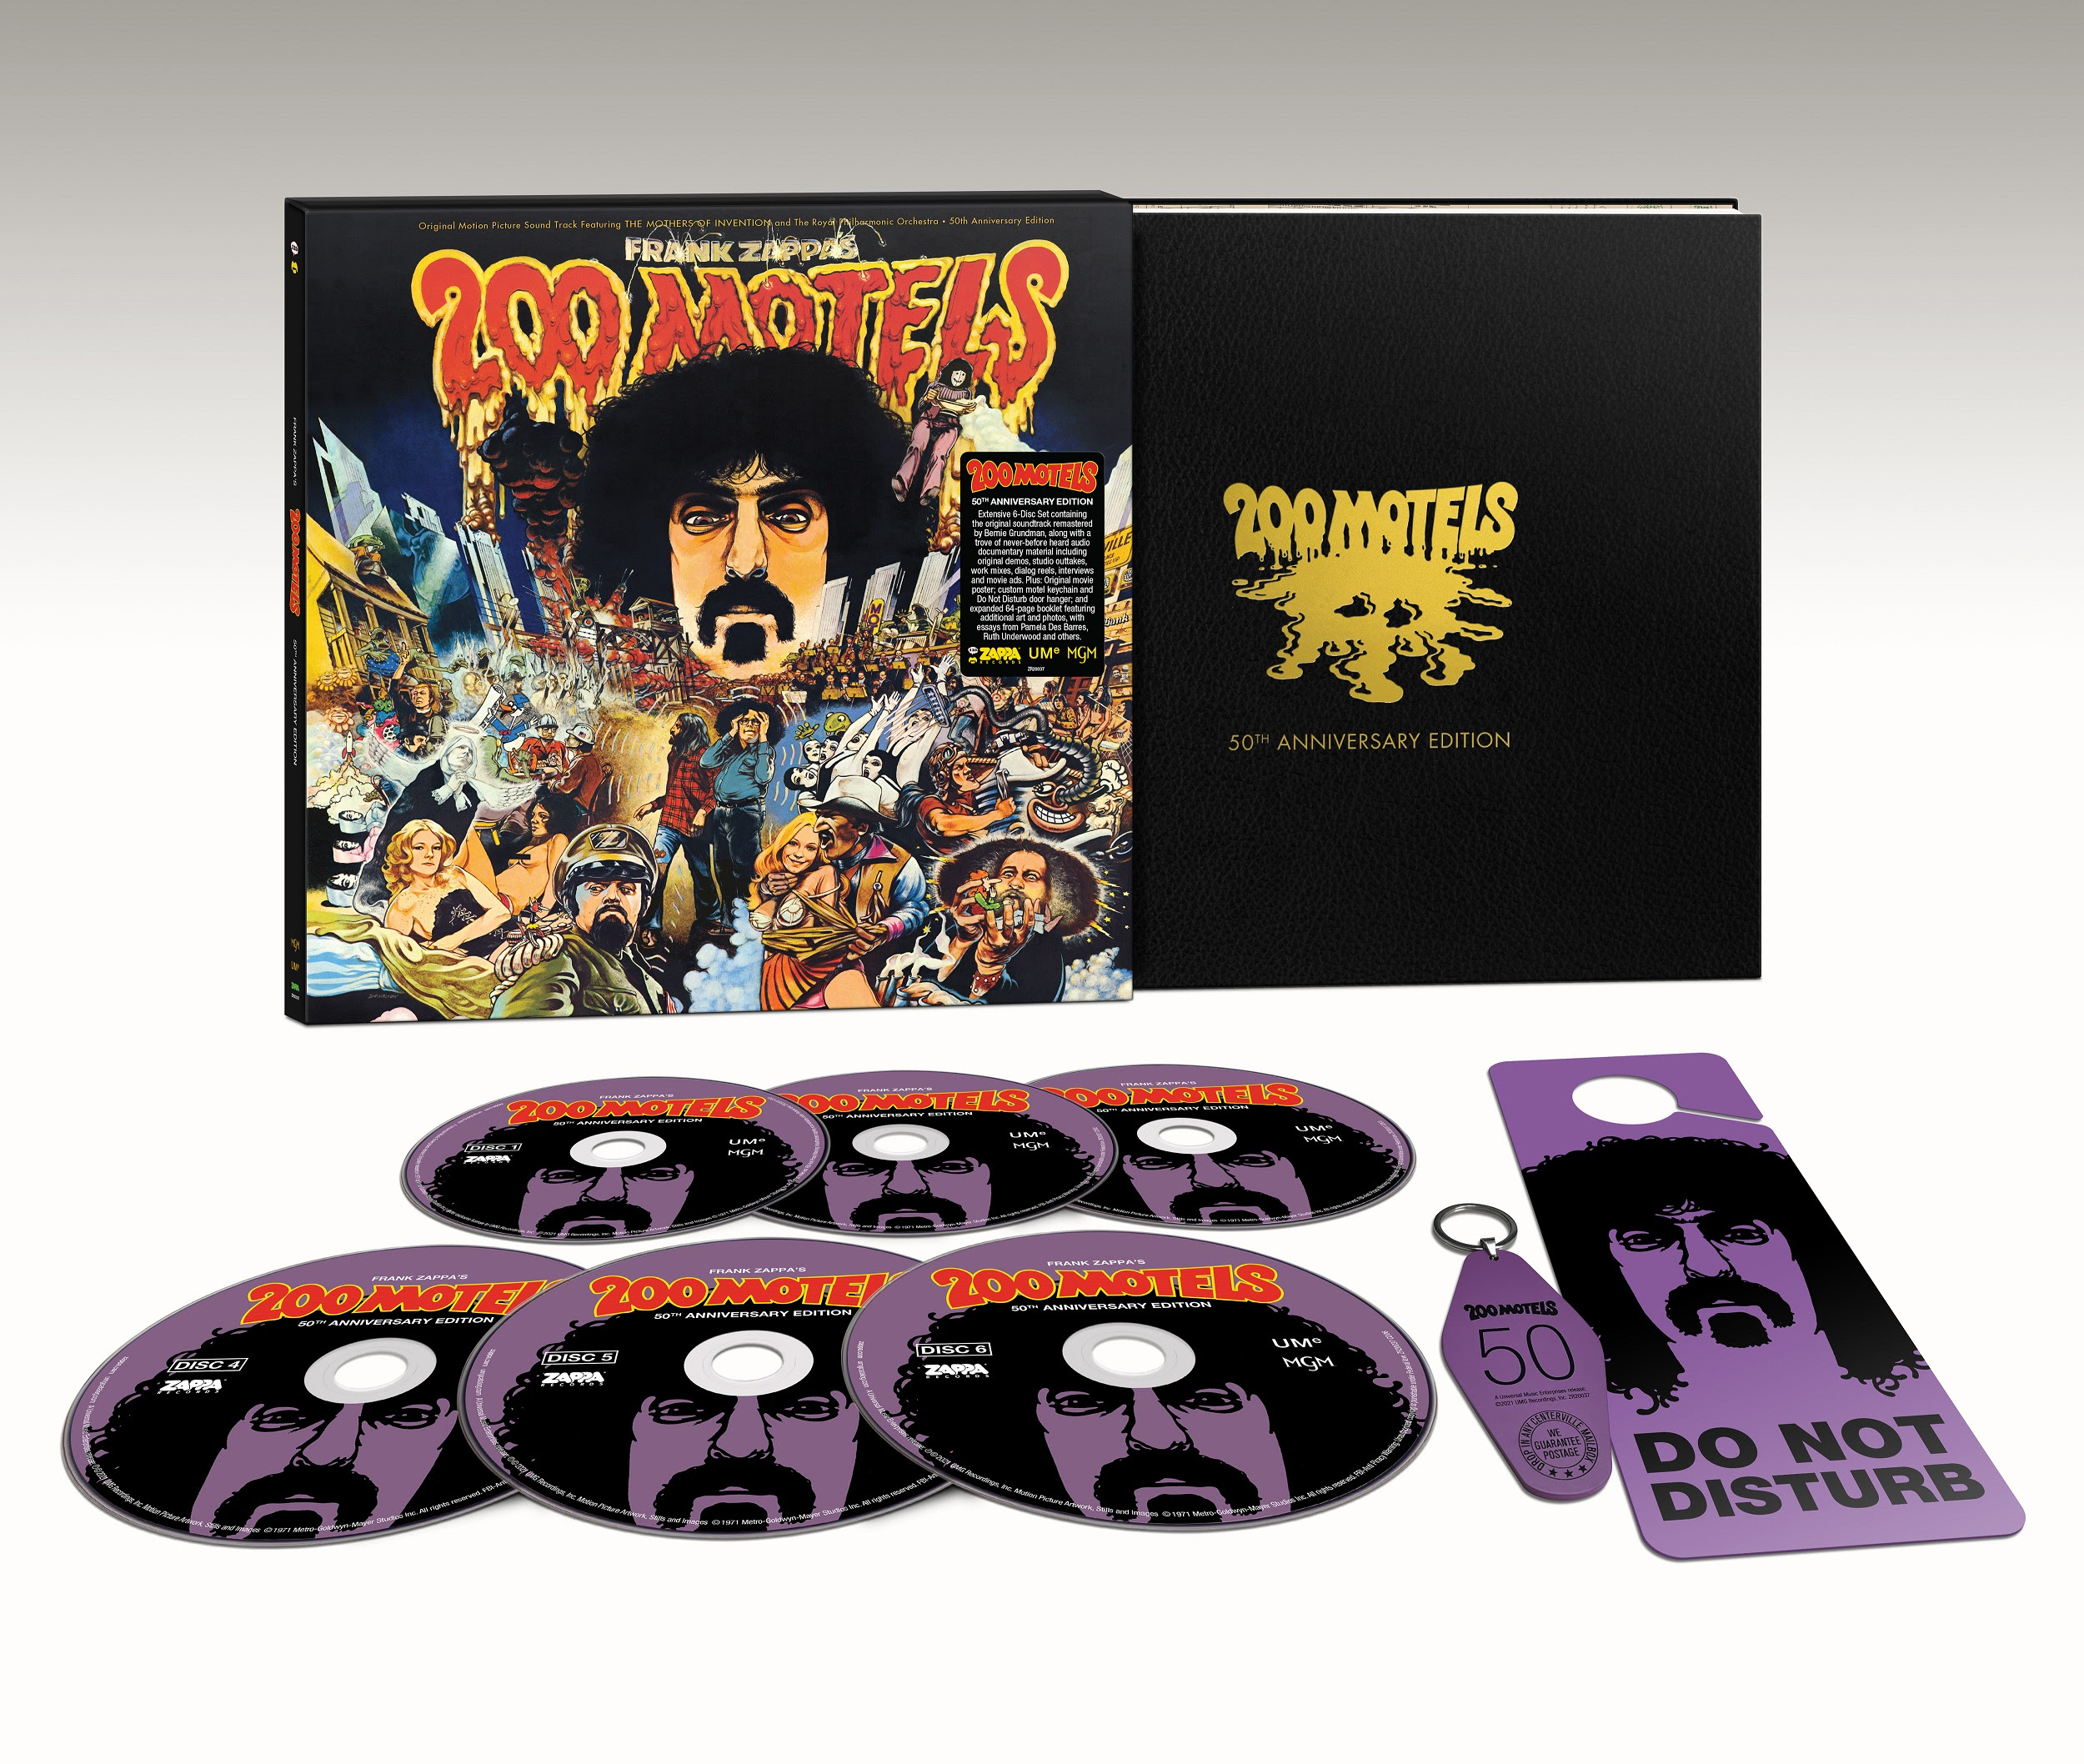 Frank Zappa's "200 Motels 50th Anniversary Edition" Out Now